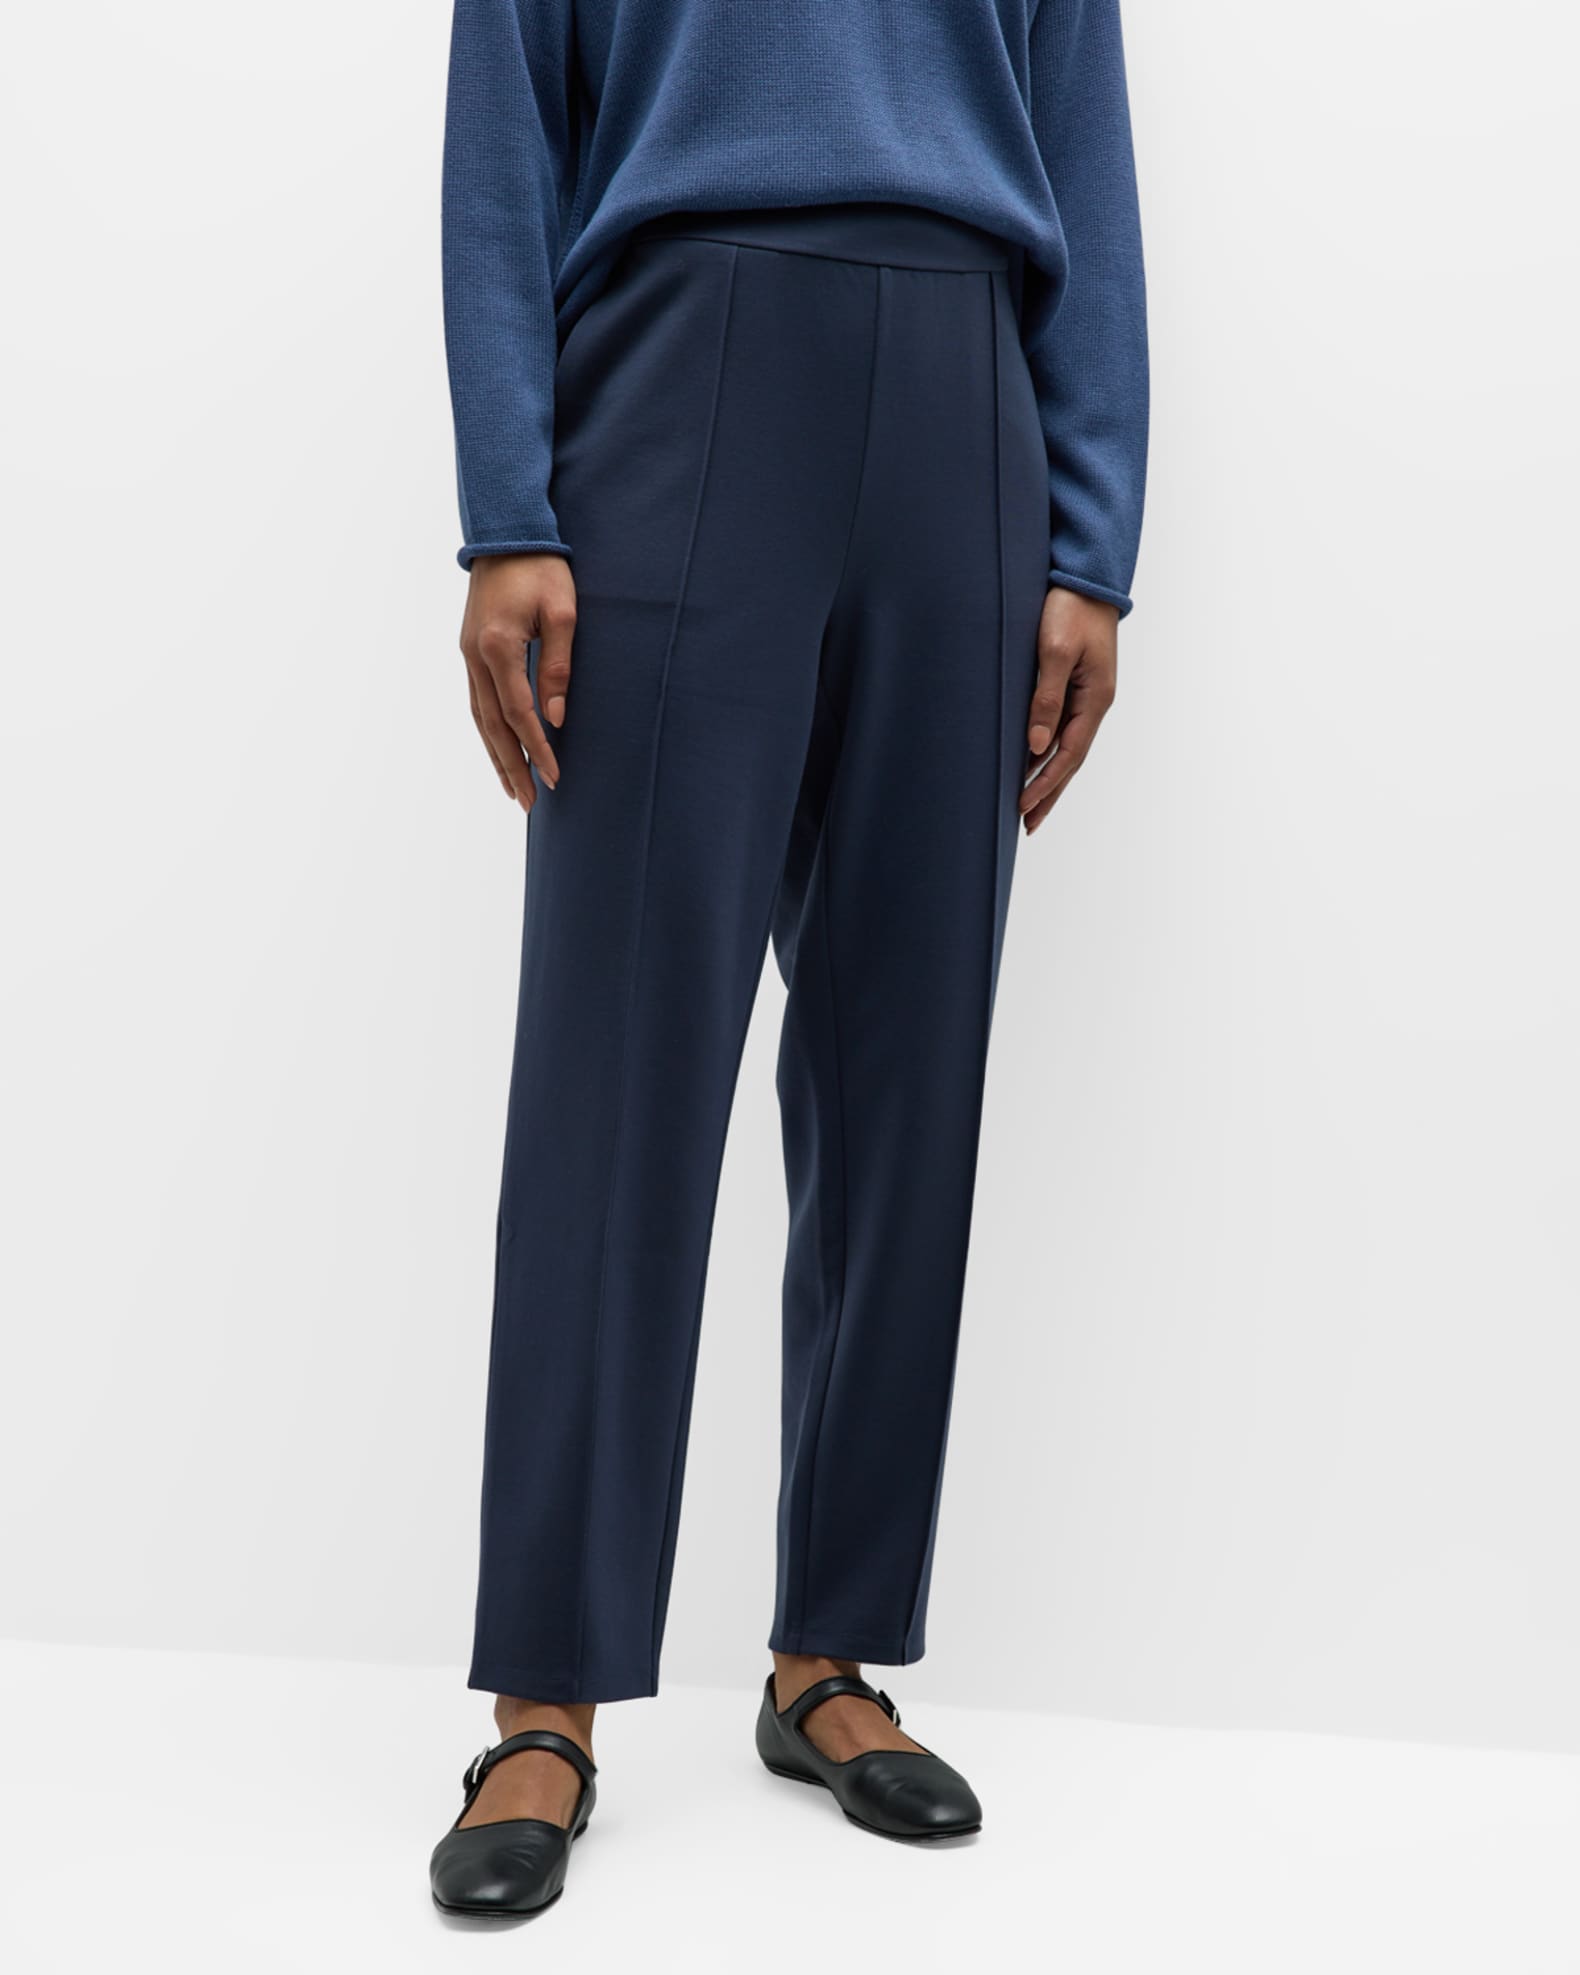 Eileen Fisher Tapered Pintuck Flex Ponte Ankle Pants | Neiman Marcus